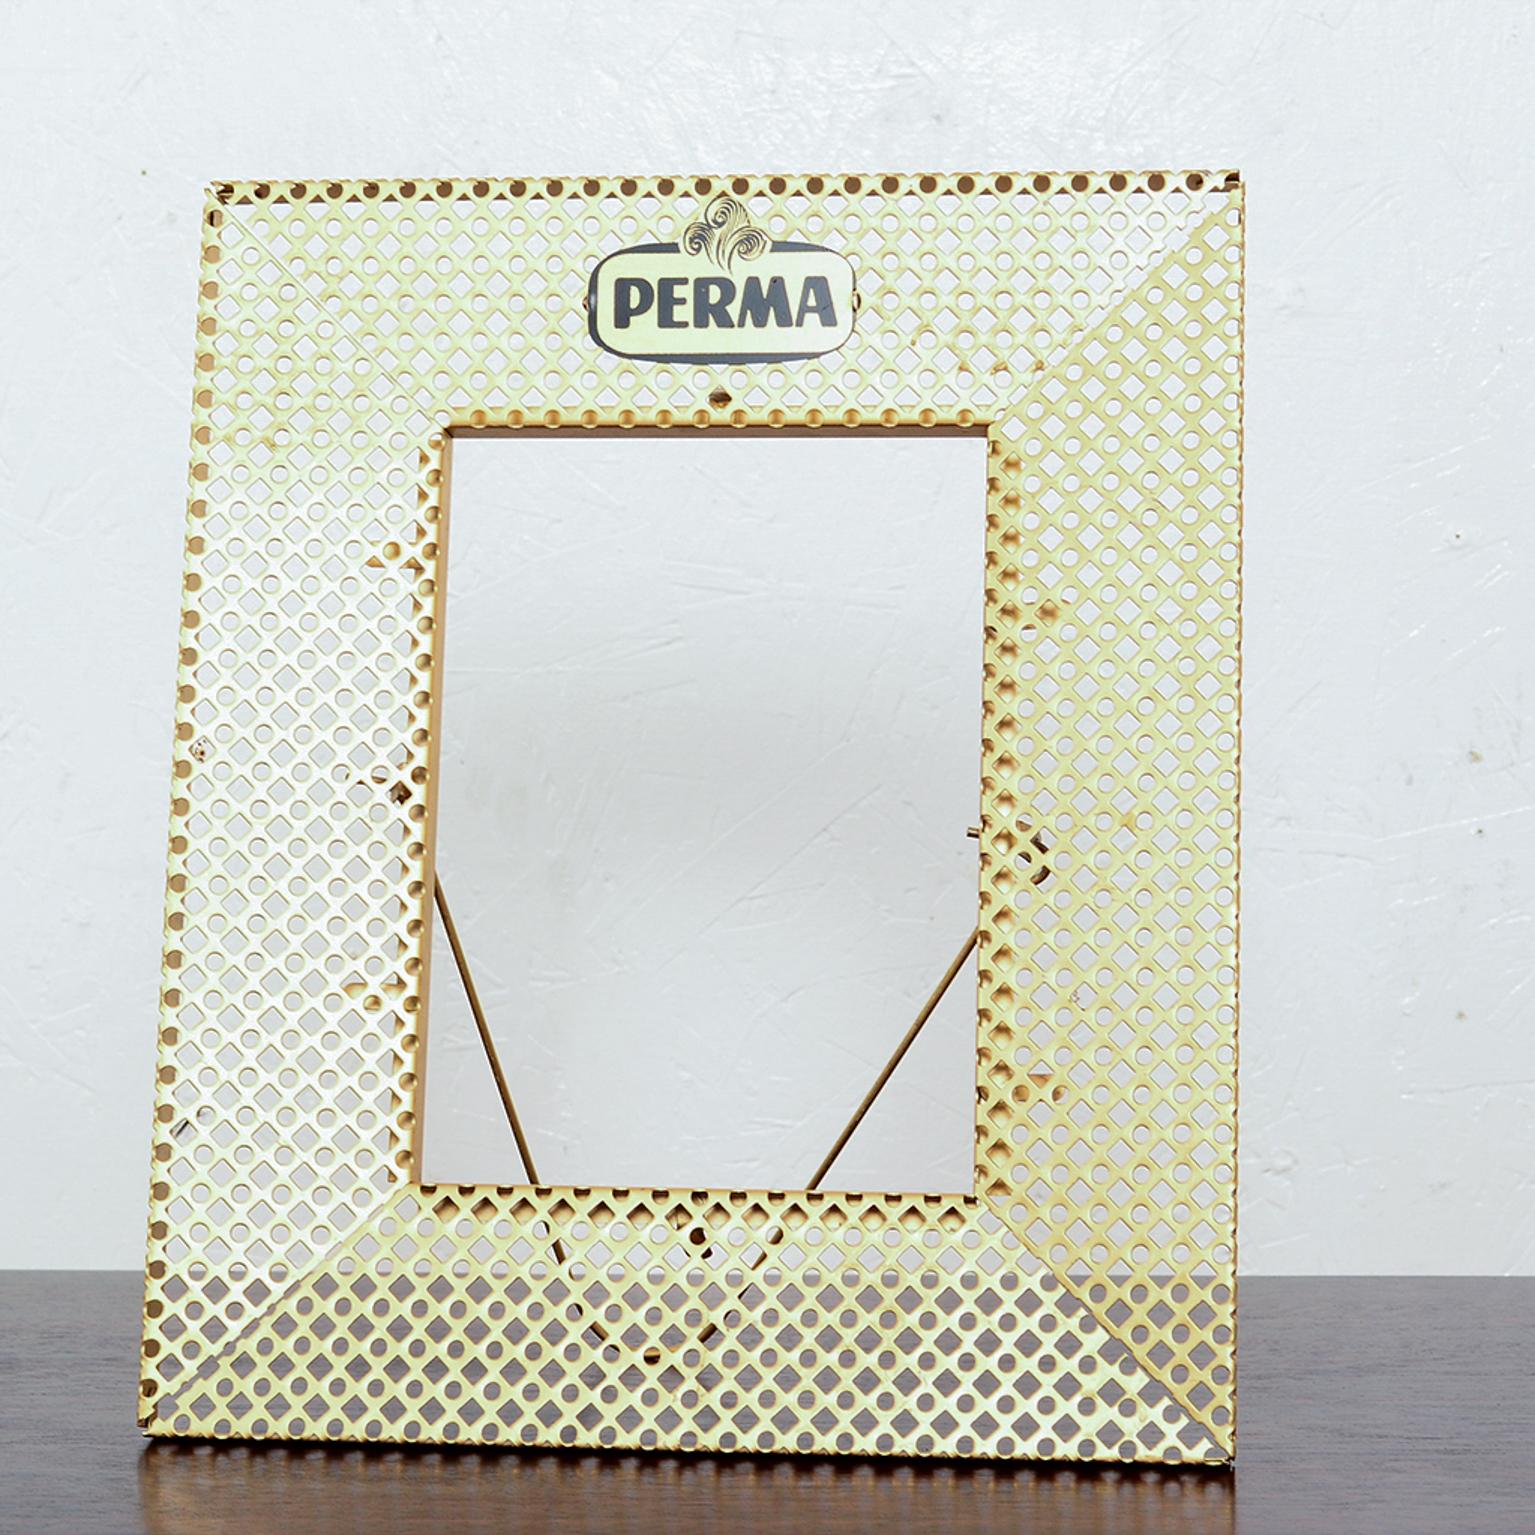 Please consider: Midcentury Italian perforated metal picture photo frame. Italy, 1950s in the style of Mathieu Matégot, renowned French material artist and technique of Rigitulle.

Dimensions: H 14.5 in. x W 12 in. x D .5 in.

Original preowned